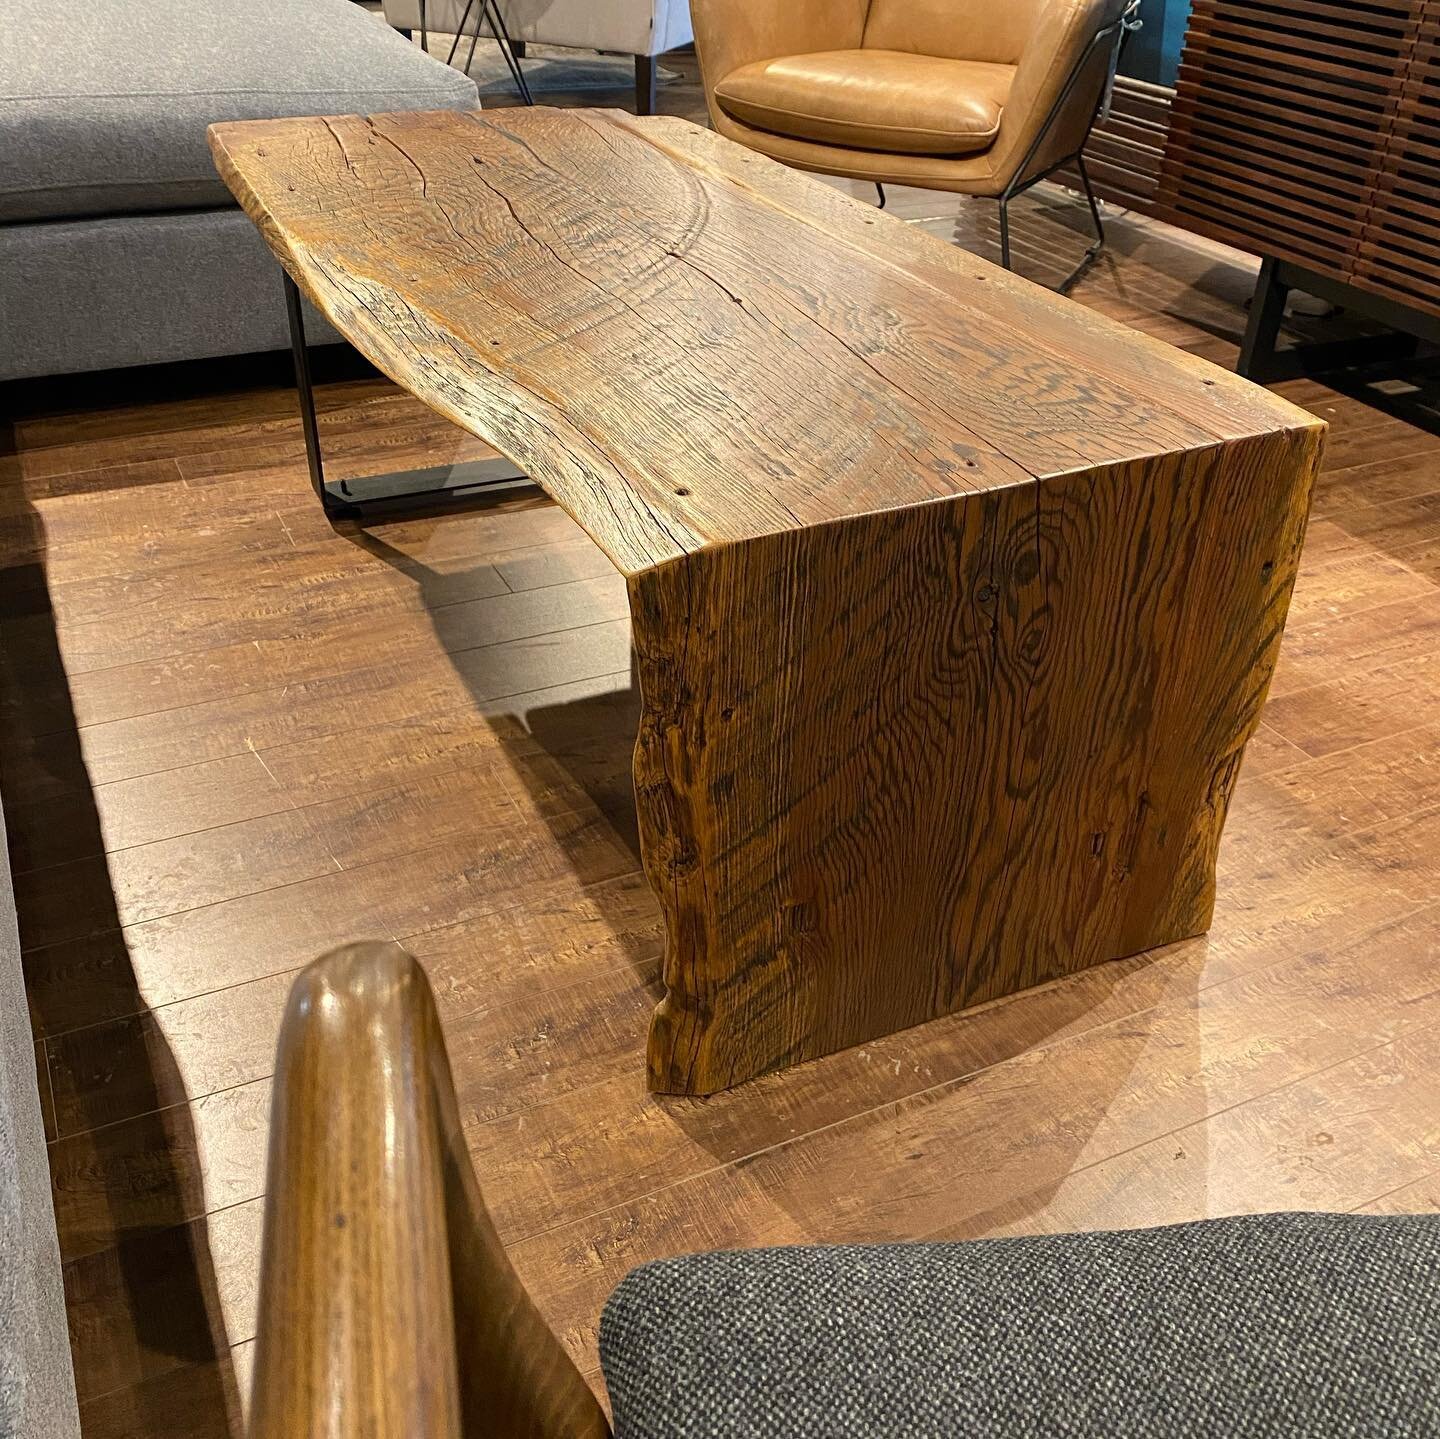 This unique waterfall table is number 5 of a series of 7. Just delivered to Portfolio Interiors. @portfoliointeriors 

It&rsquo;s made from a single, wide slab that weathered half a century outdoors while protecting livestock from the wind.
#reclaime